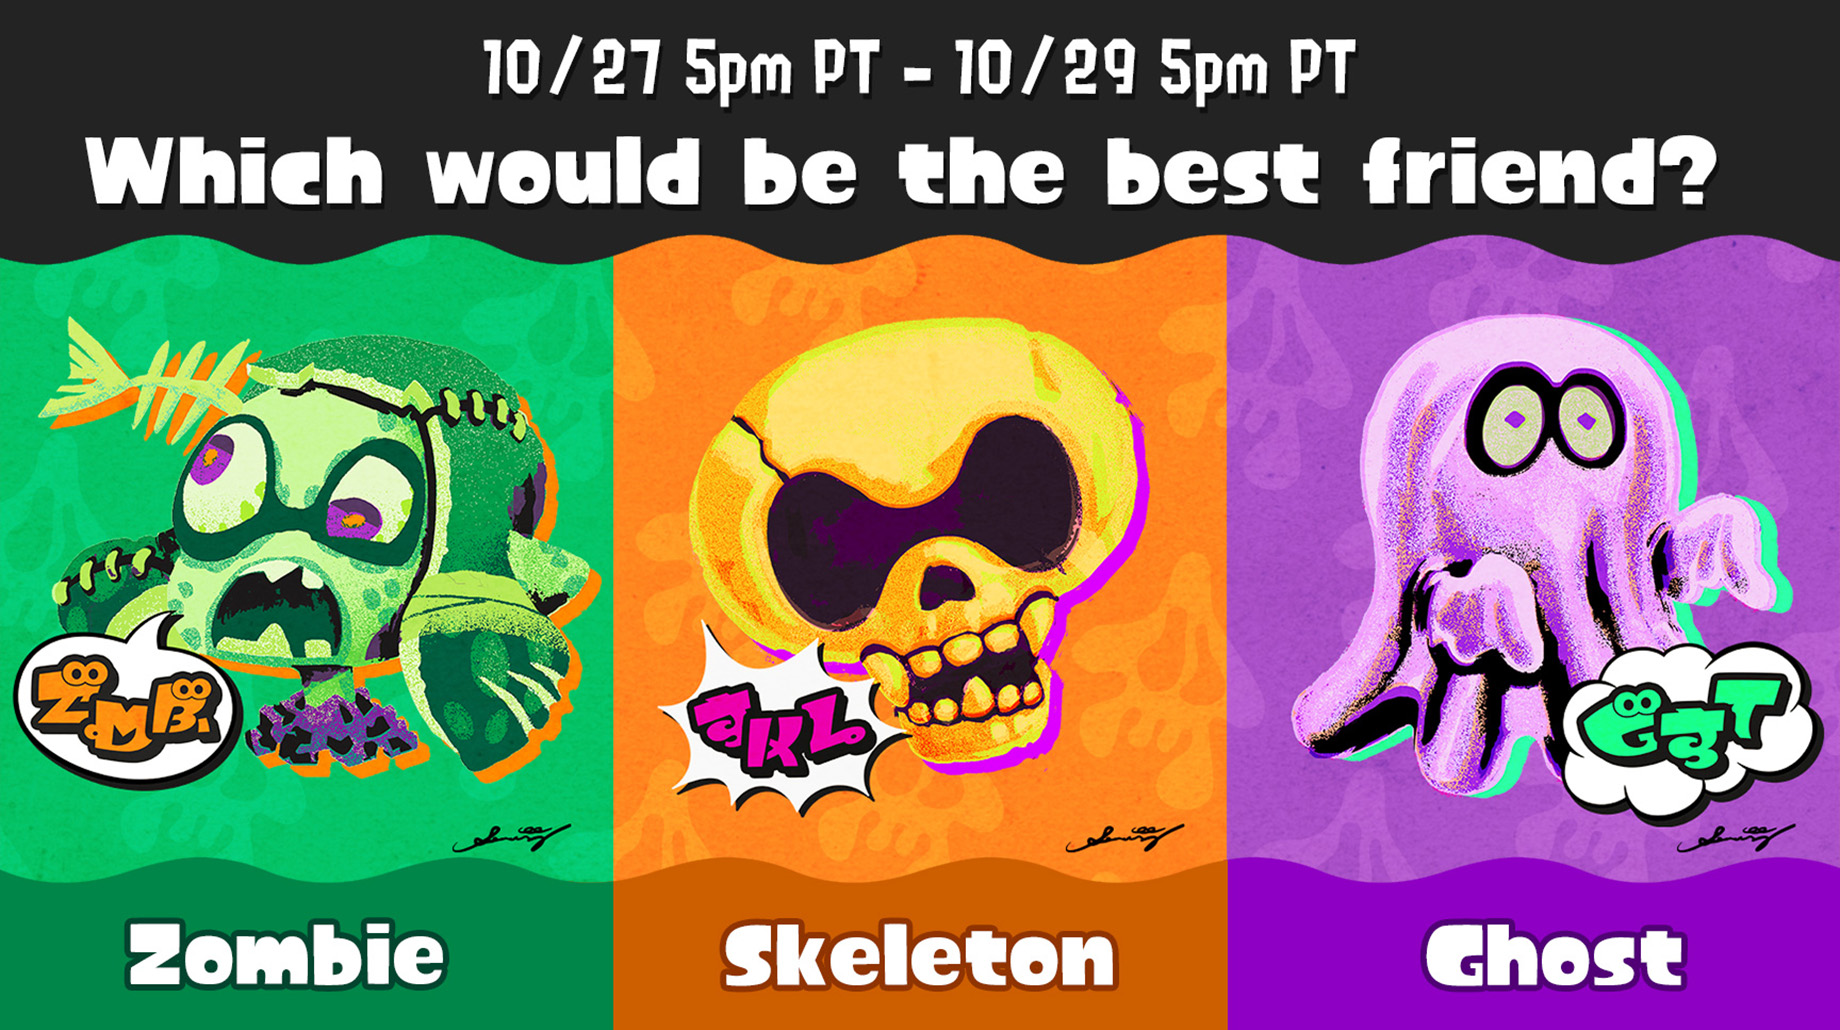 Which would be the best friend? Zombie, Skeleton, or Ghost?